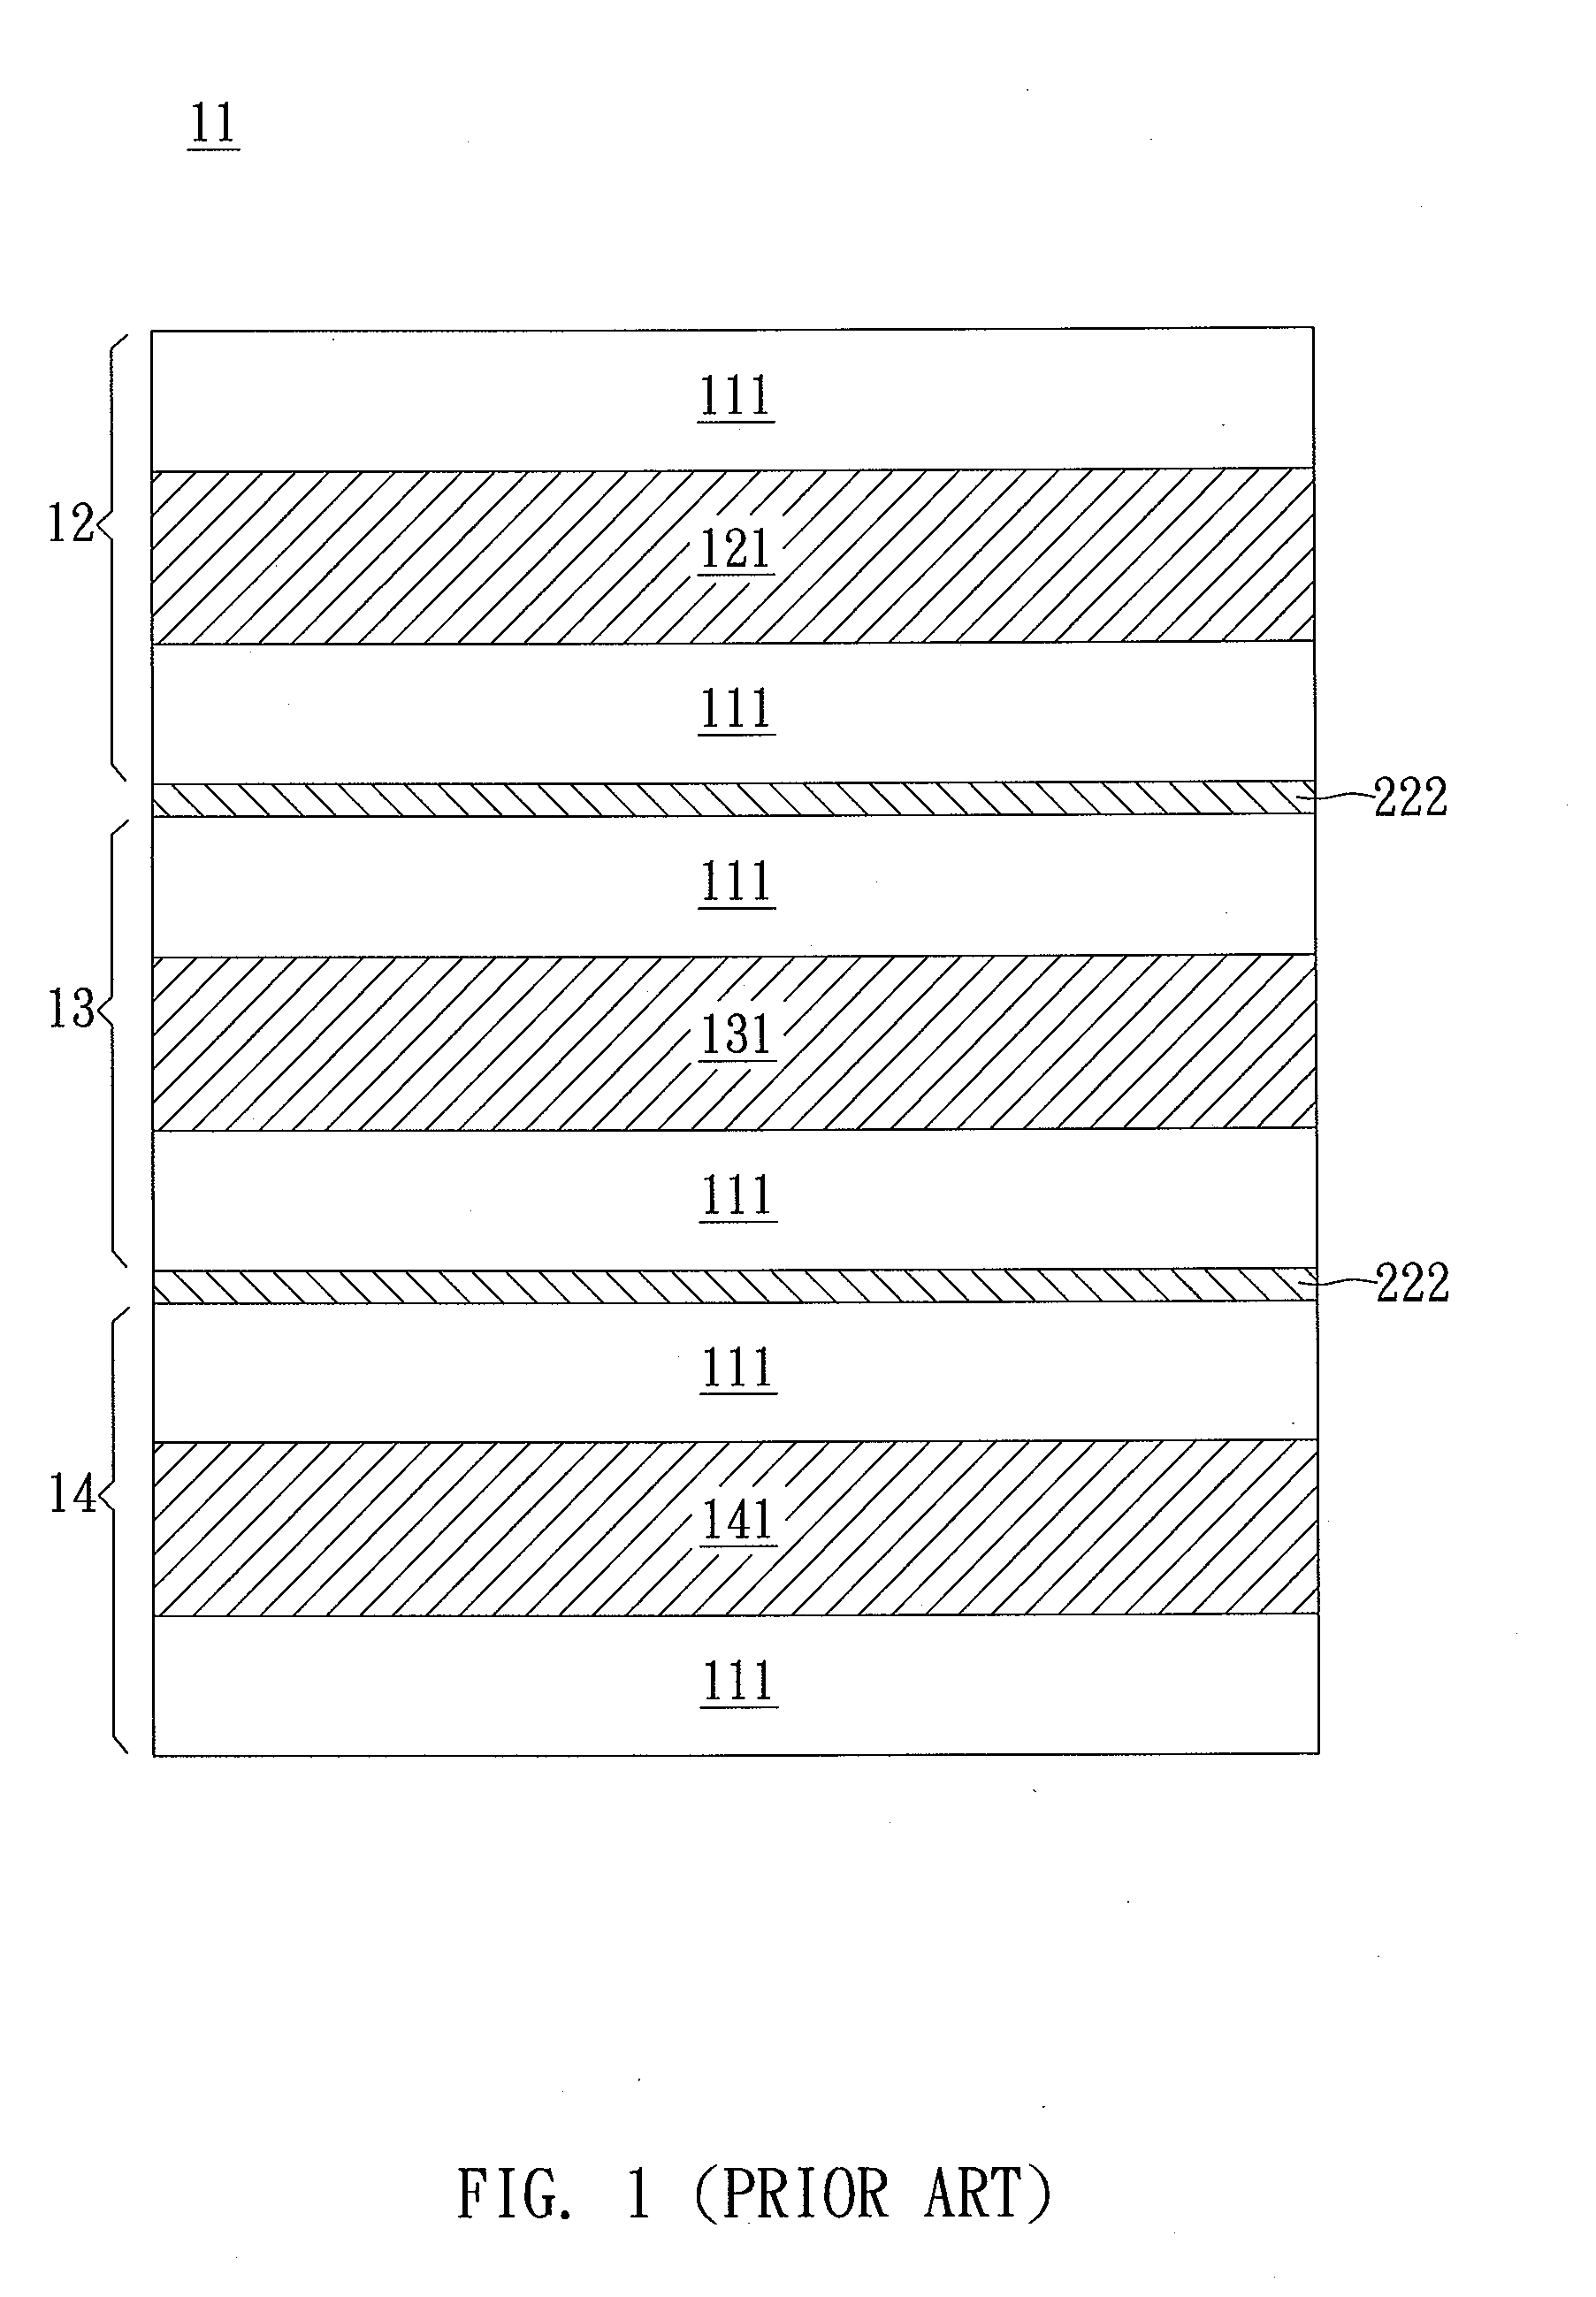 Stereoscopic image control module and stereoscopic display device